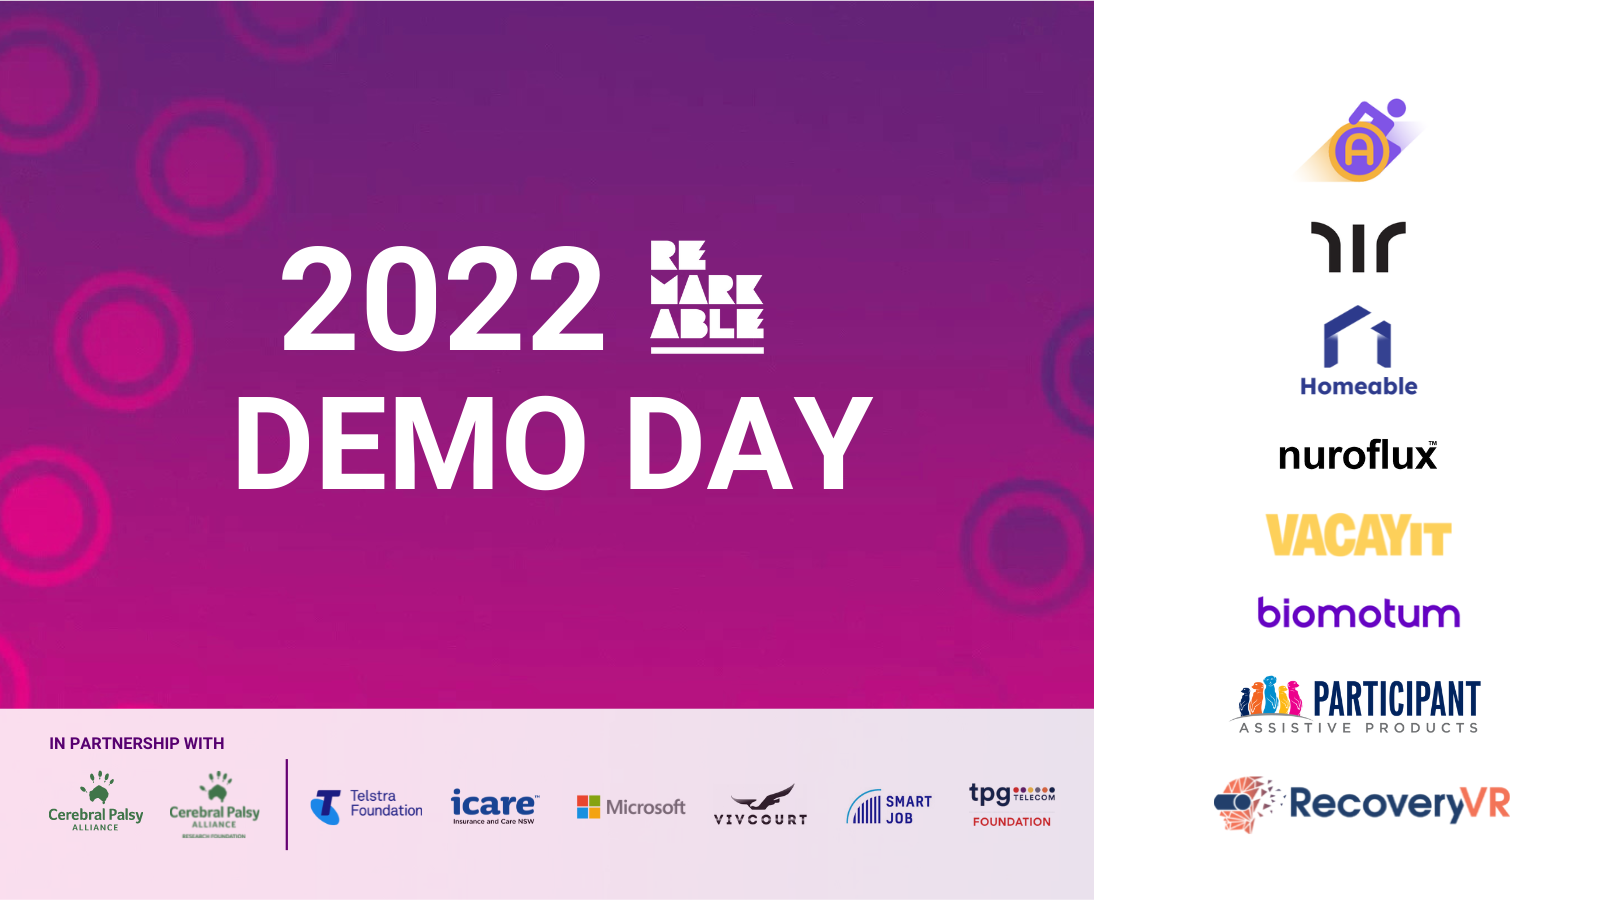 2022 Remarkable Demo Day